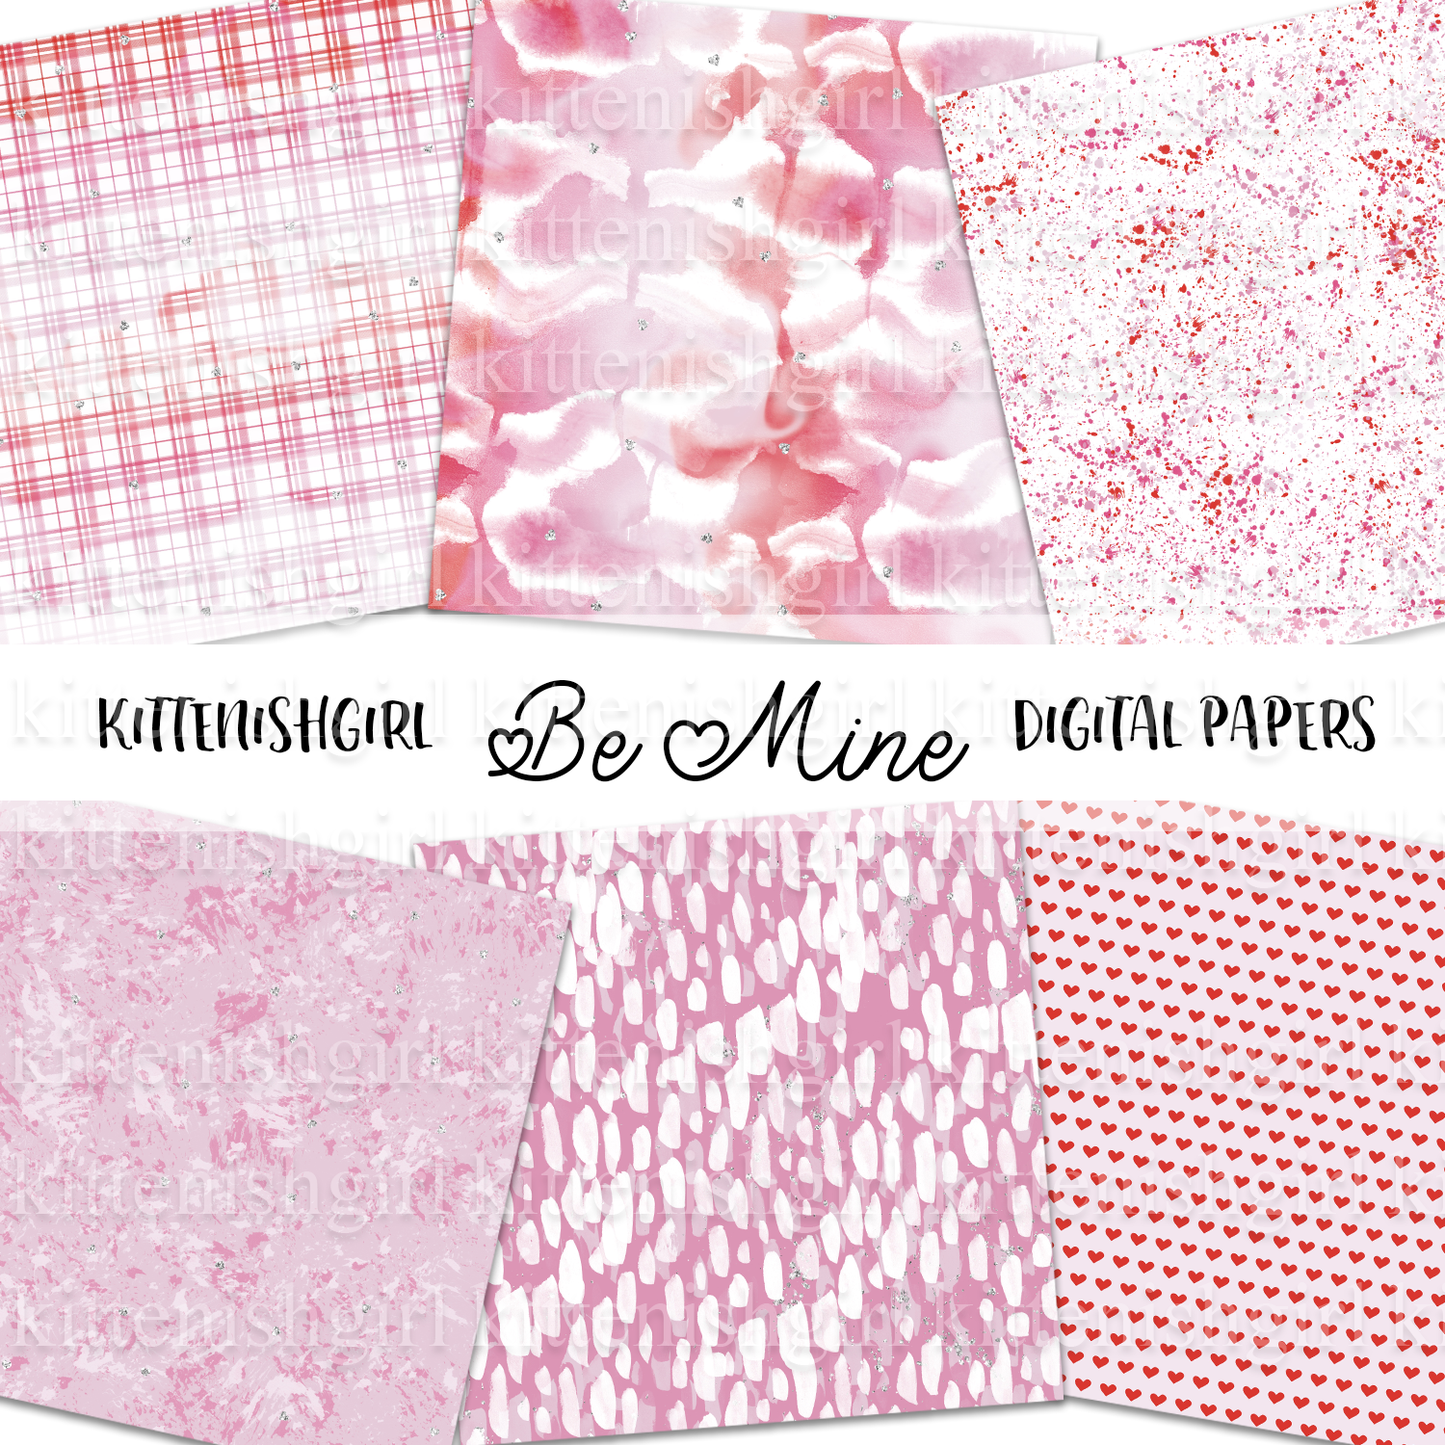 Be Mine // Digital Papers